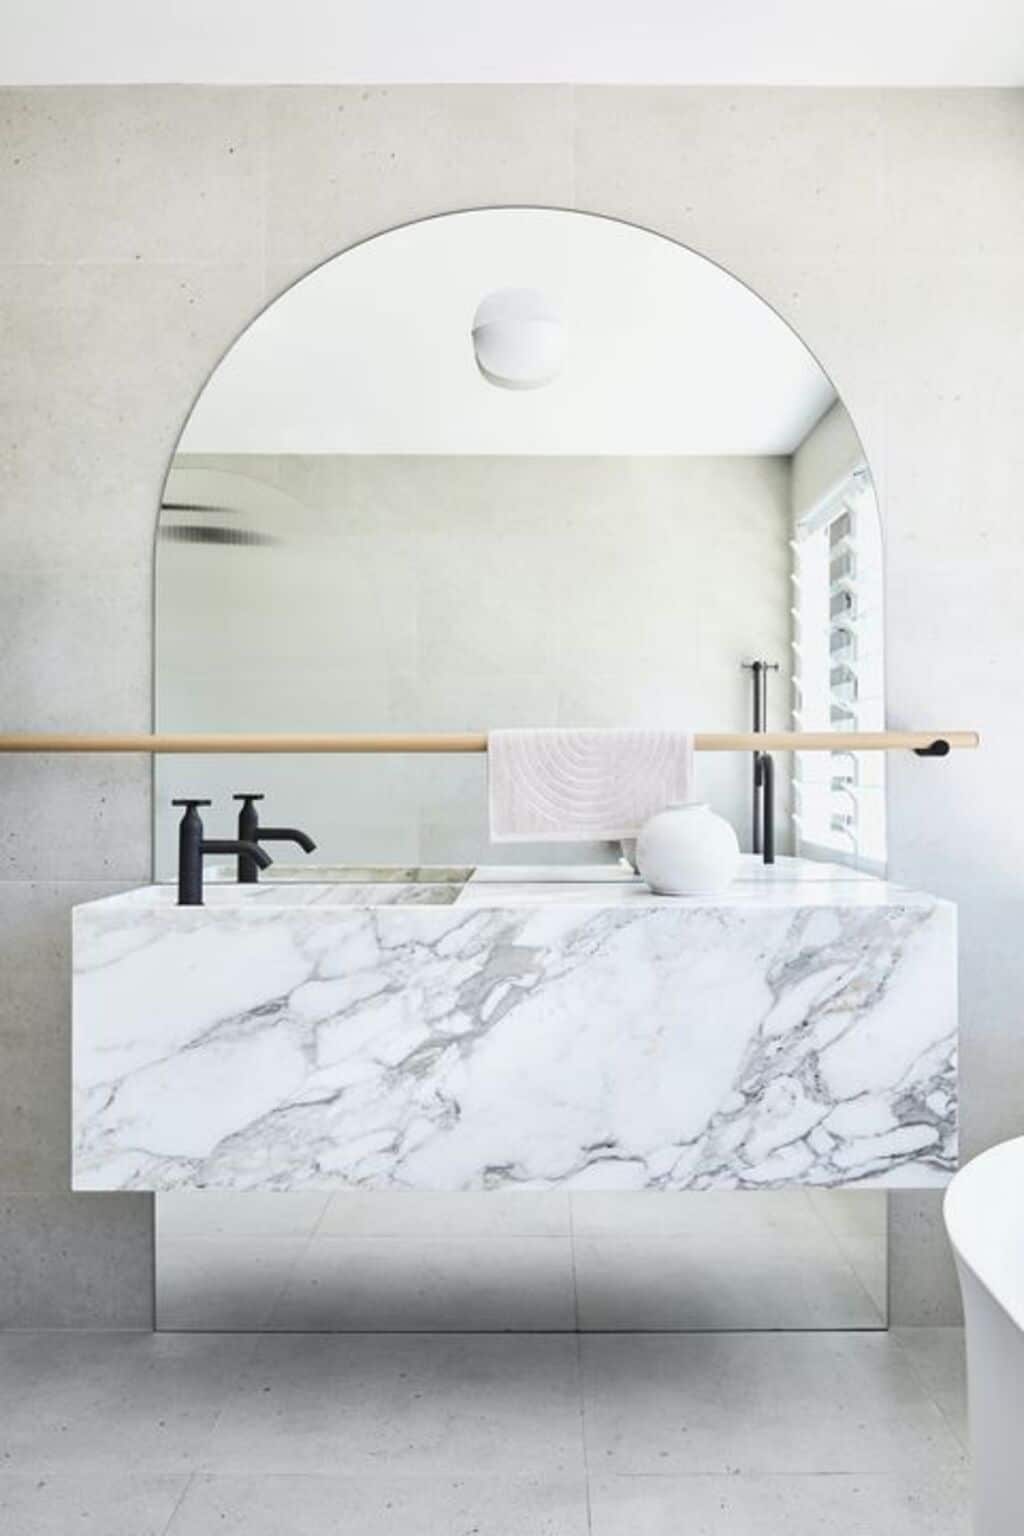 A bathroom with a marble counter top and a round mirror
